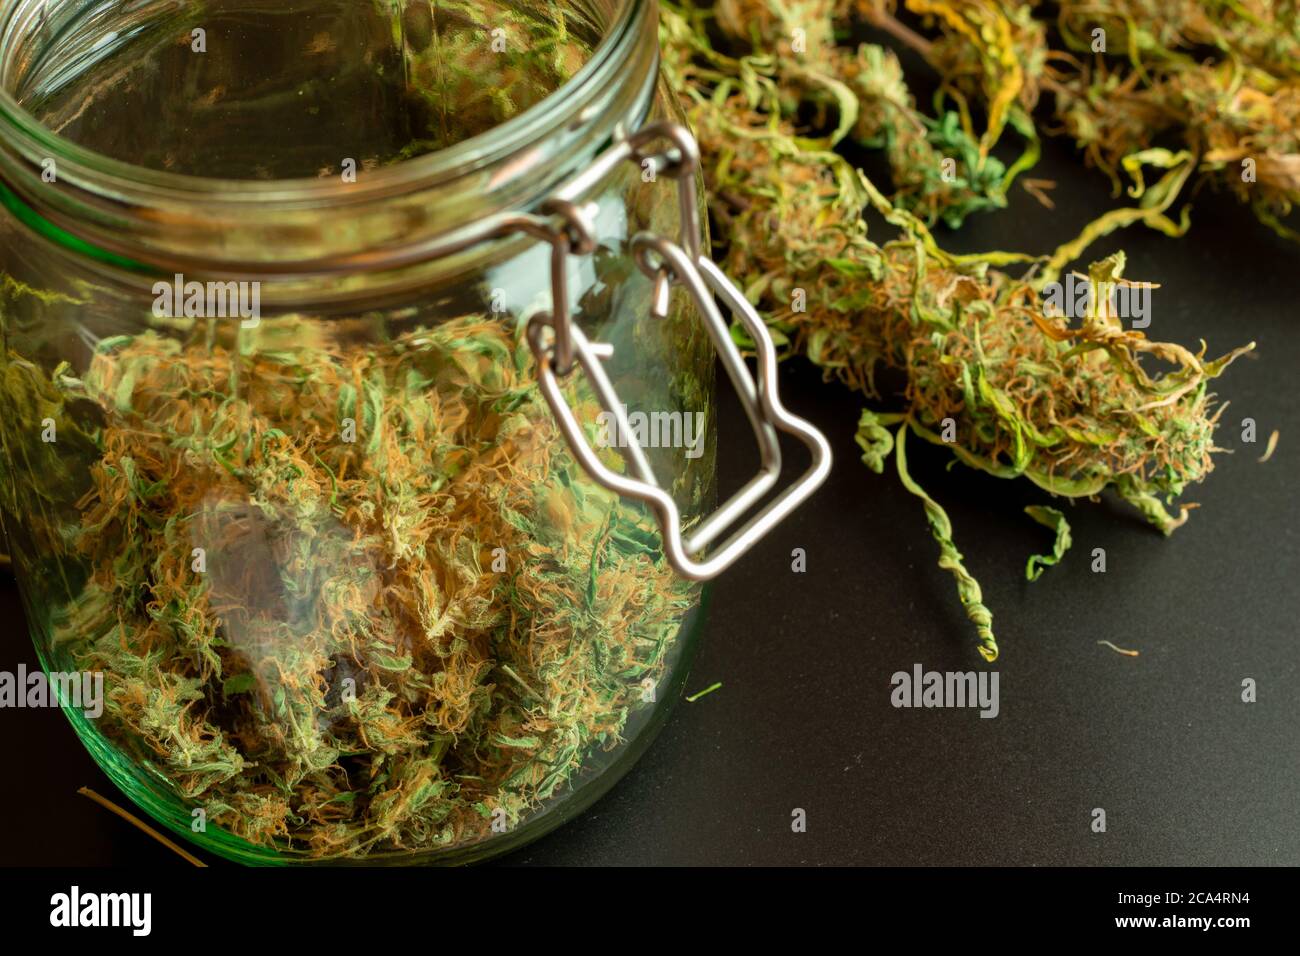 Big jar with dry and trim cannabis buds and marijuana plants on background. Legal medical weed industry Stock Photo